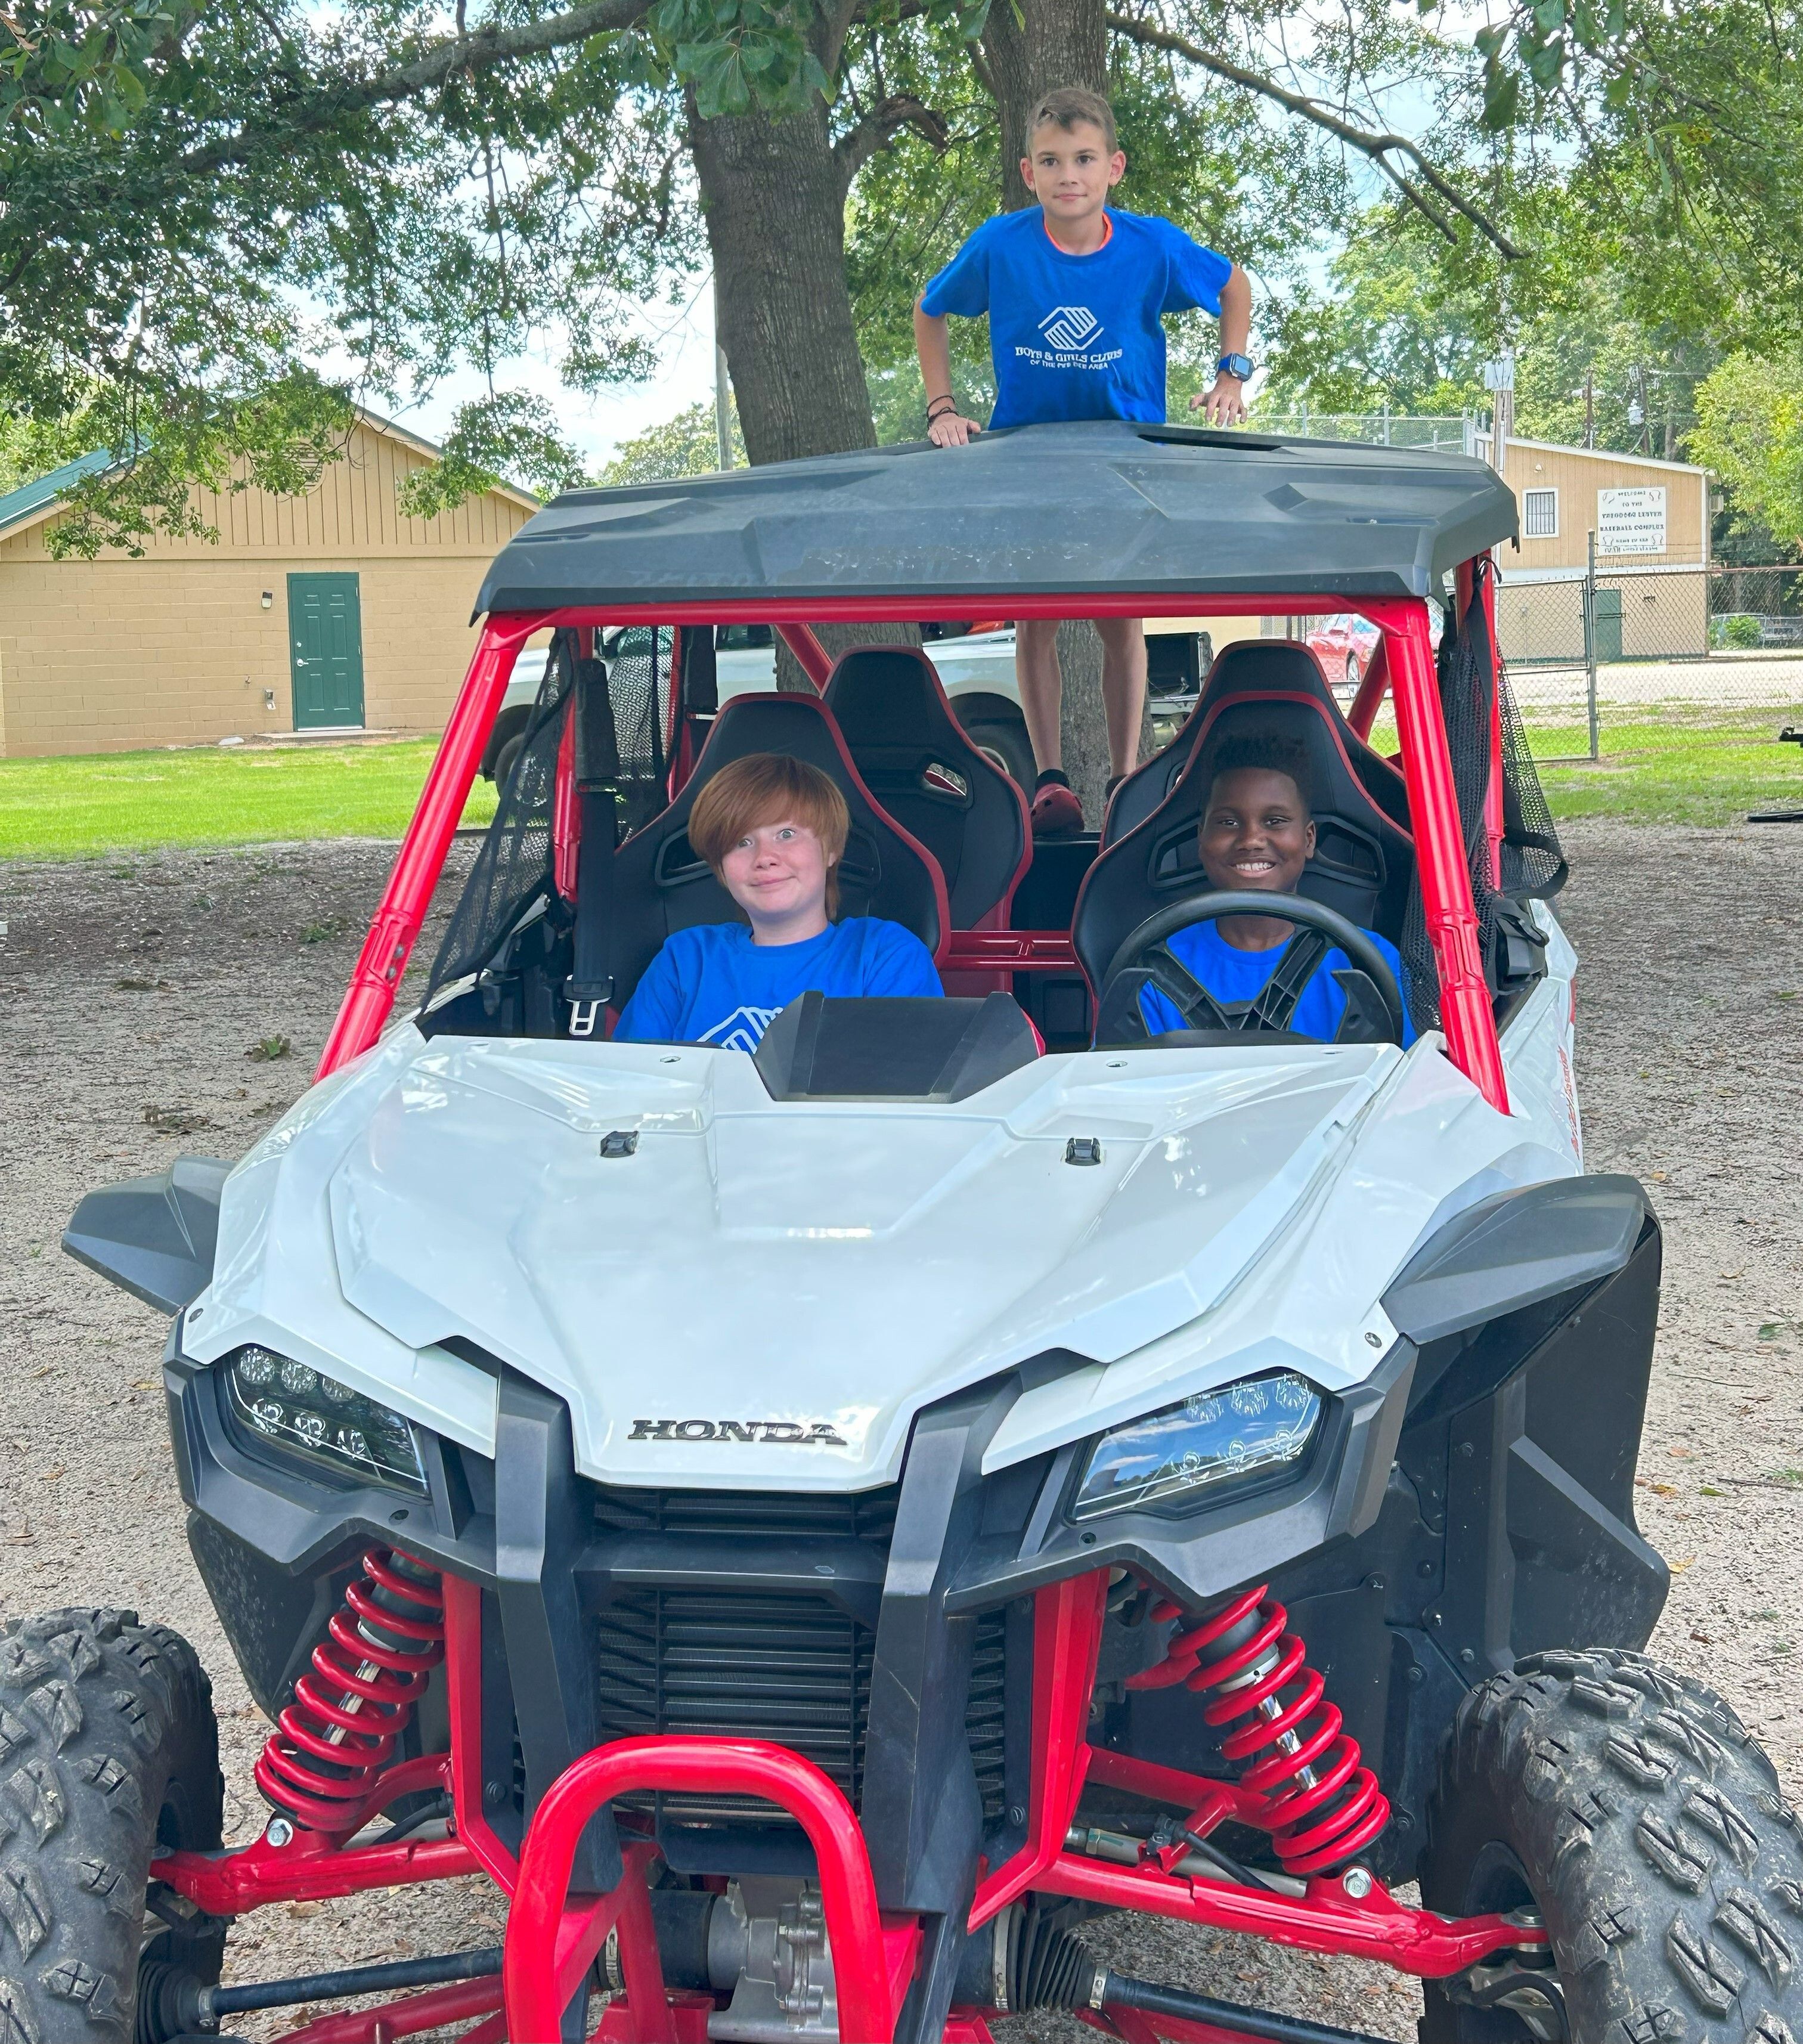 Kids from the Florence Boys & Girls Club ride in a Honda SxS